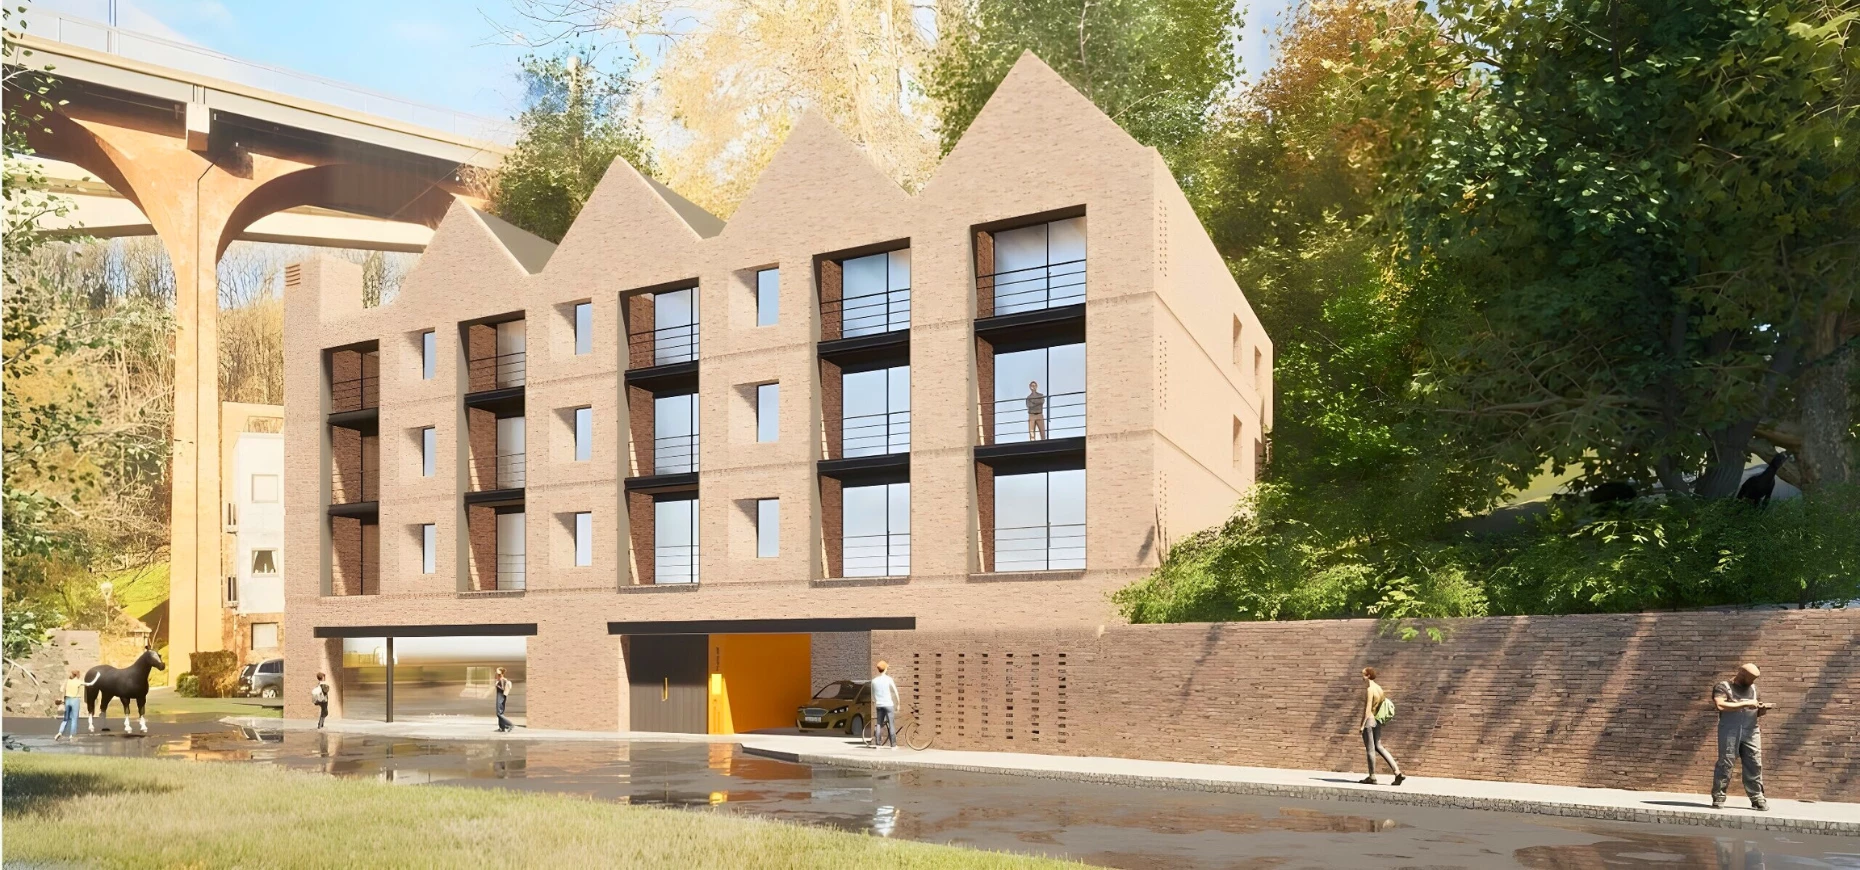 CG image of modified apart-hotel plans for Ouseburn valley